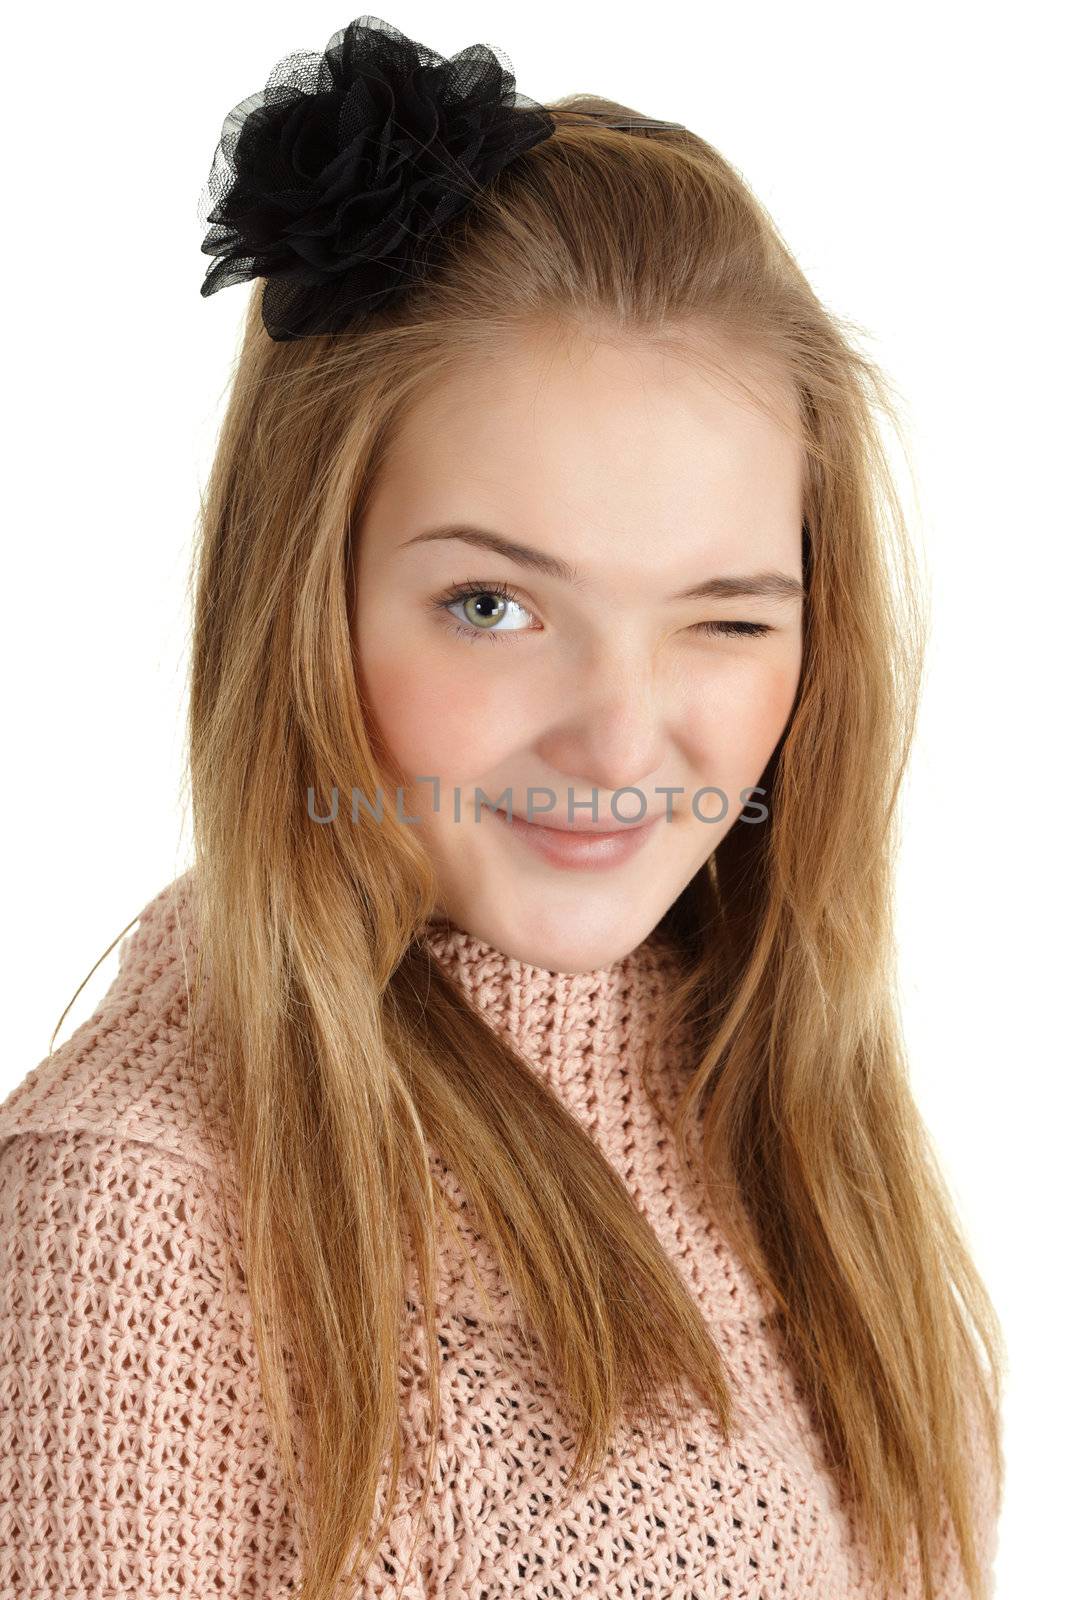 Playful young girl winks at us on a white background